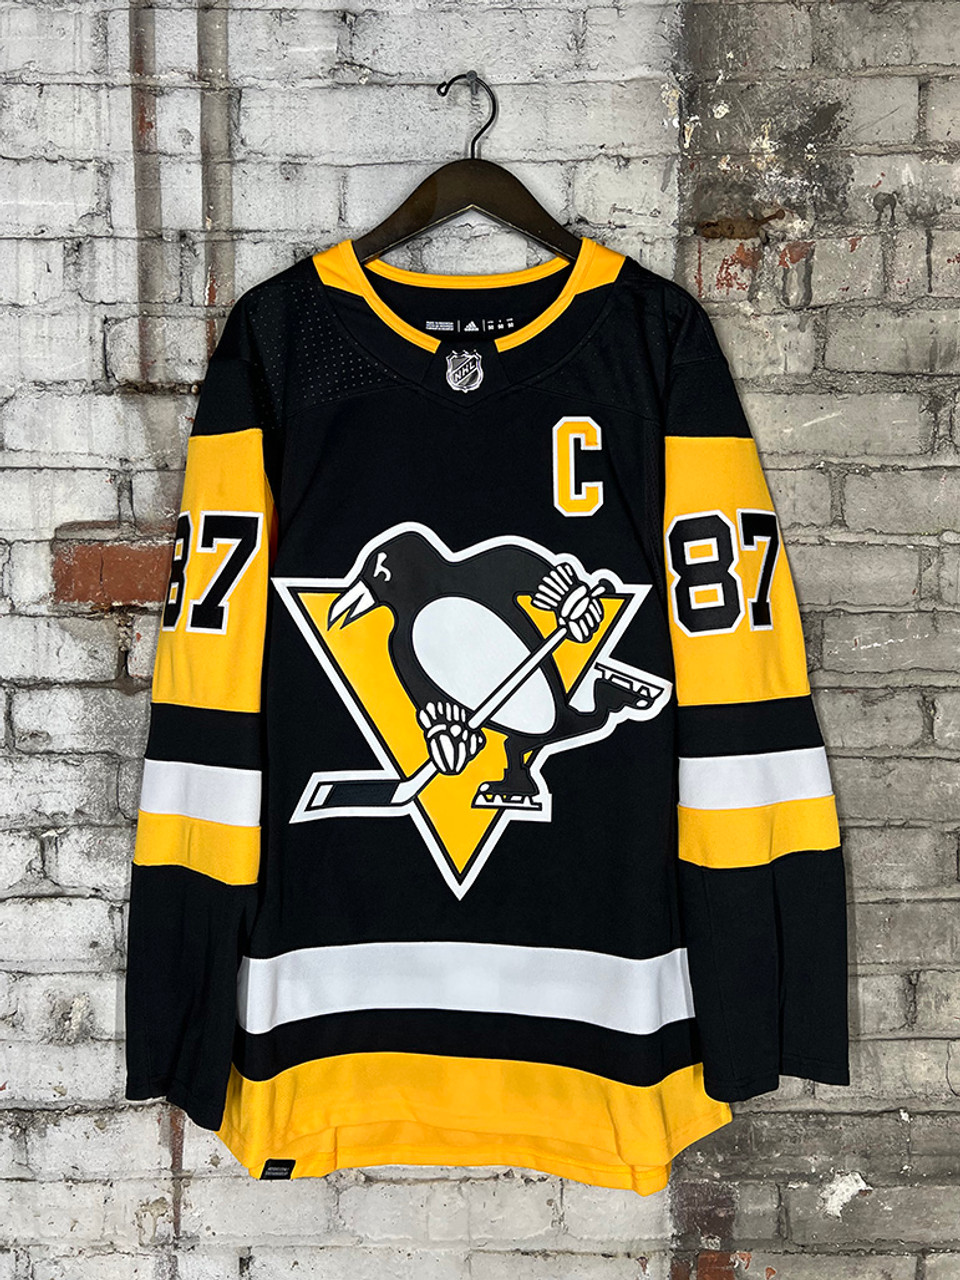 #87 Crosby - Fanatics NHL Official Pittsburgh Penguins Captain Jersey  (Black)